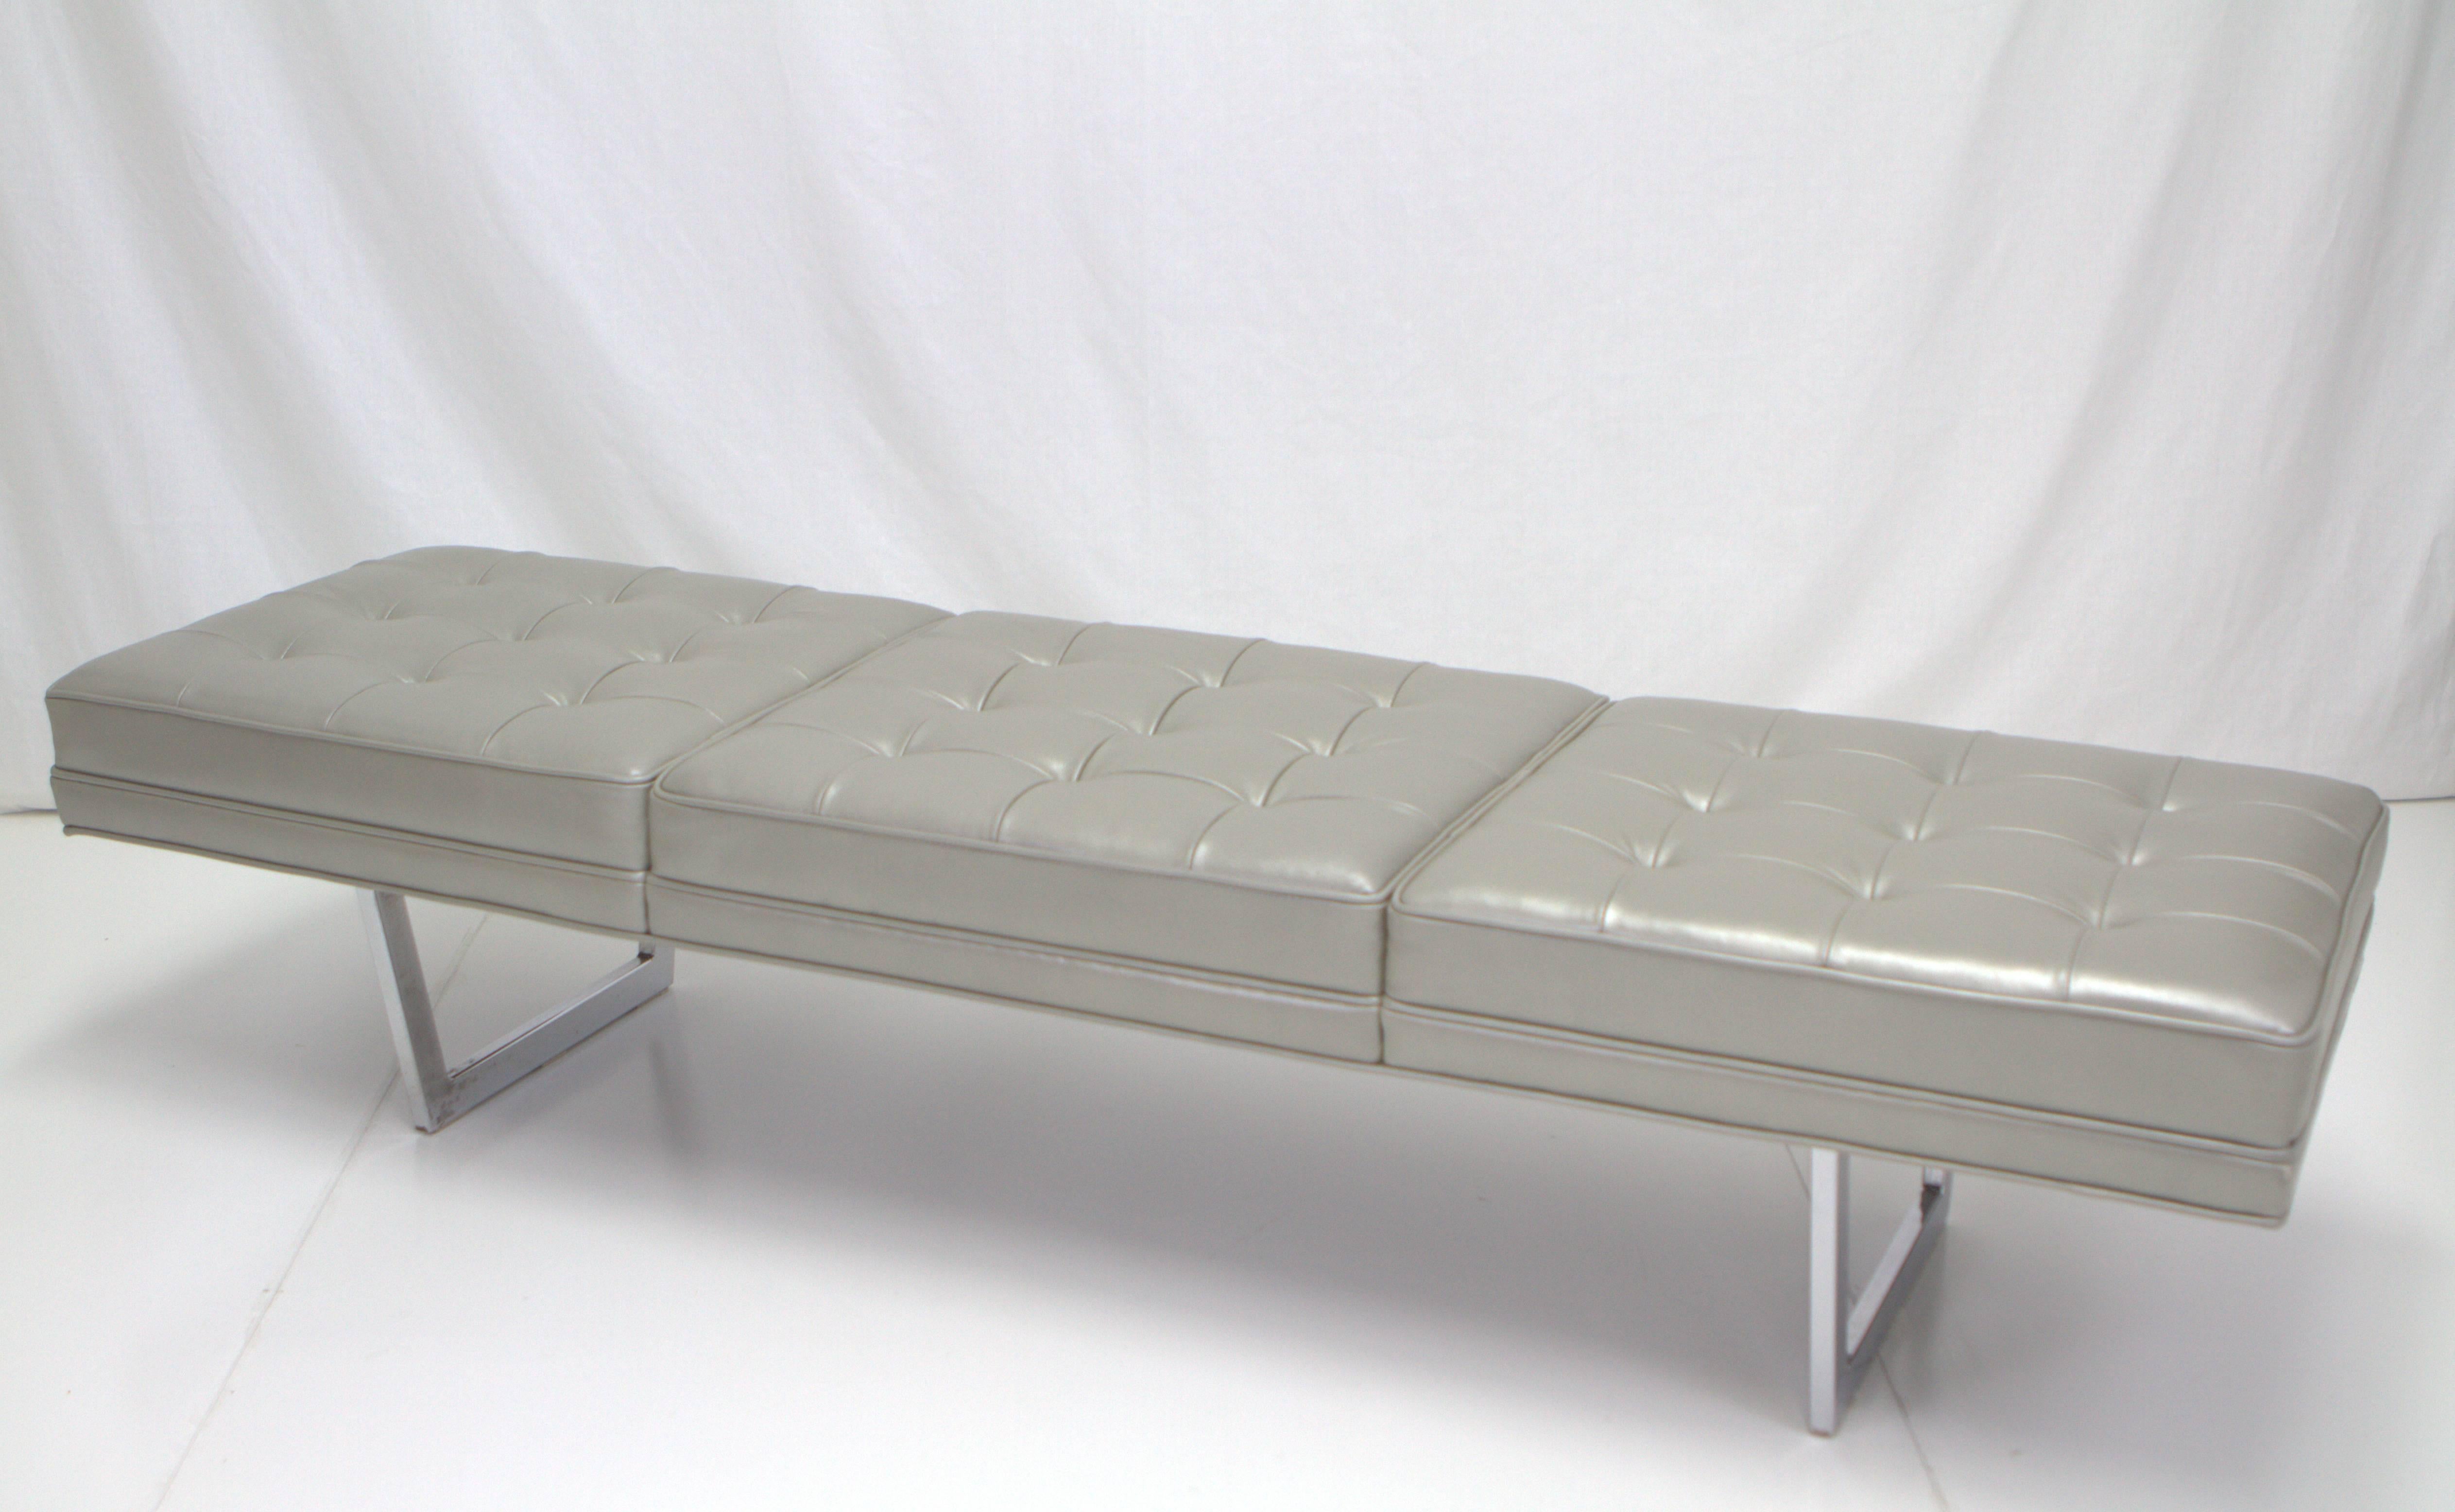 Fascinating metallic silver leather upholstered bench consisting of three biscuit tufted sections on chrome base. Base reminiscent of George Nelson while top upholstered in Florence Knoll style. Newly upholstered with chrome base in original